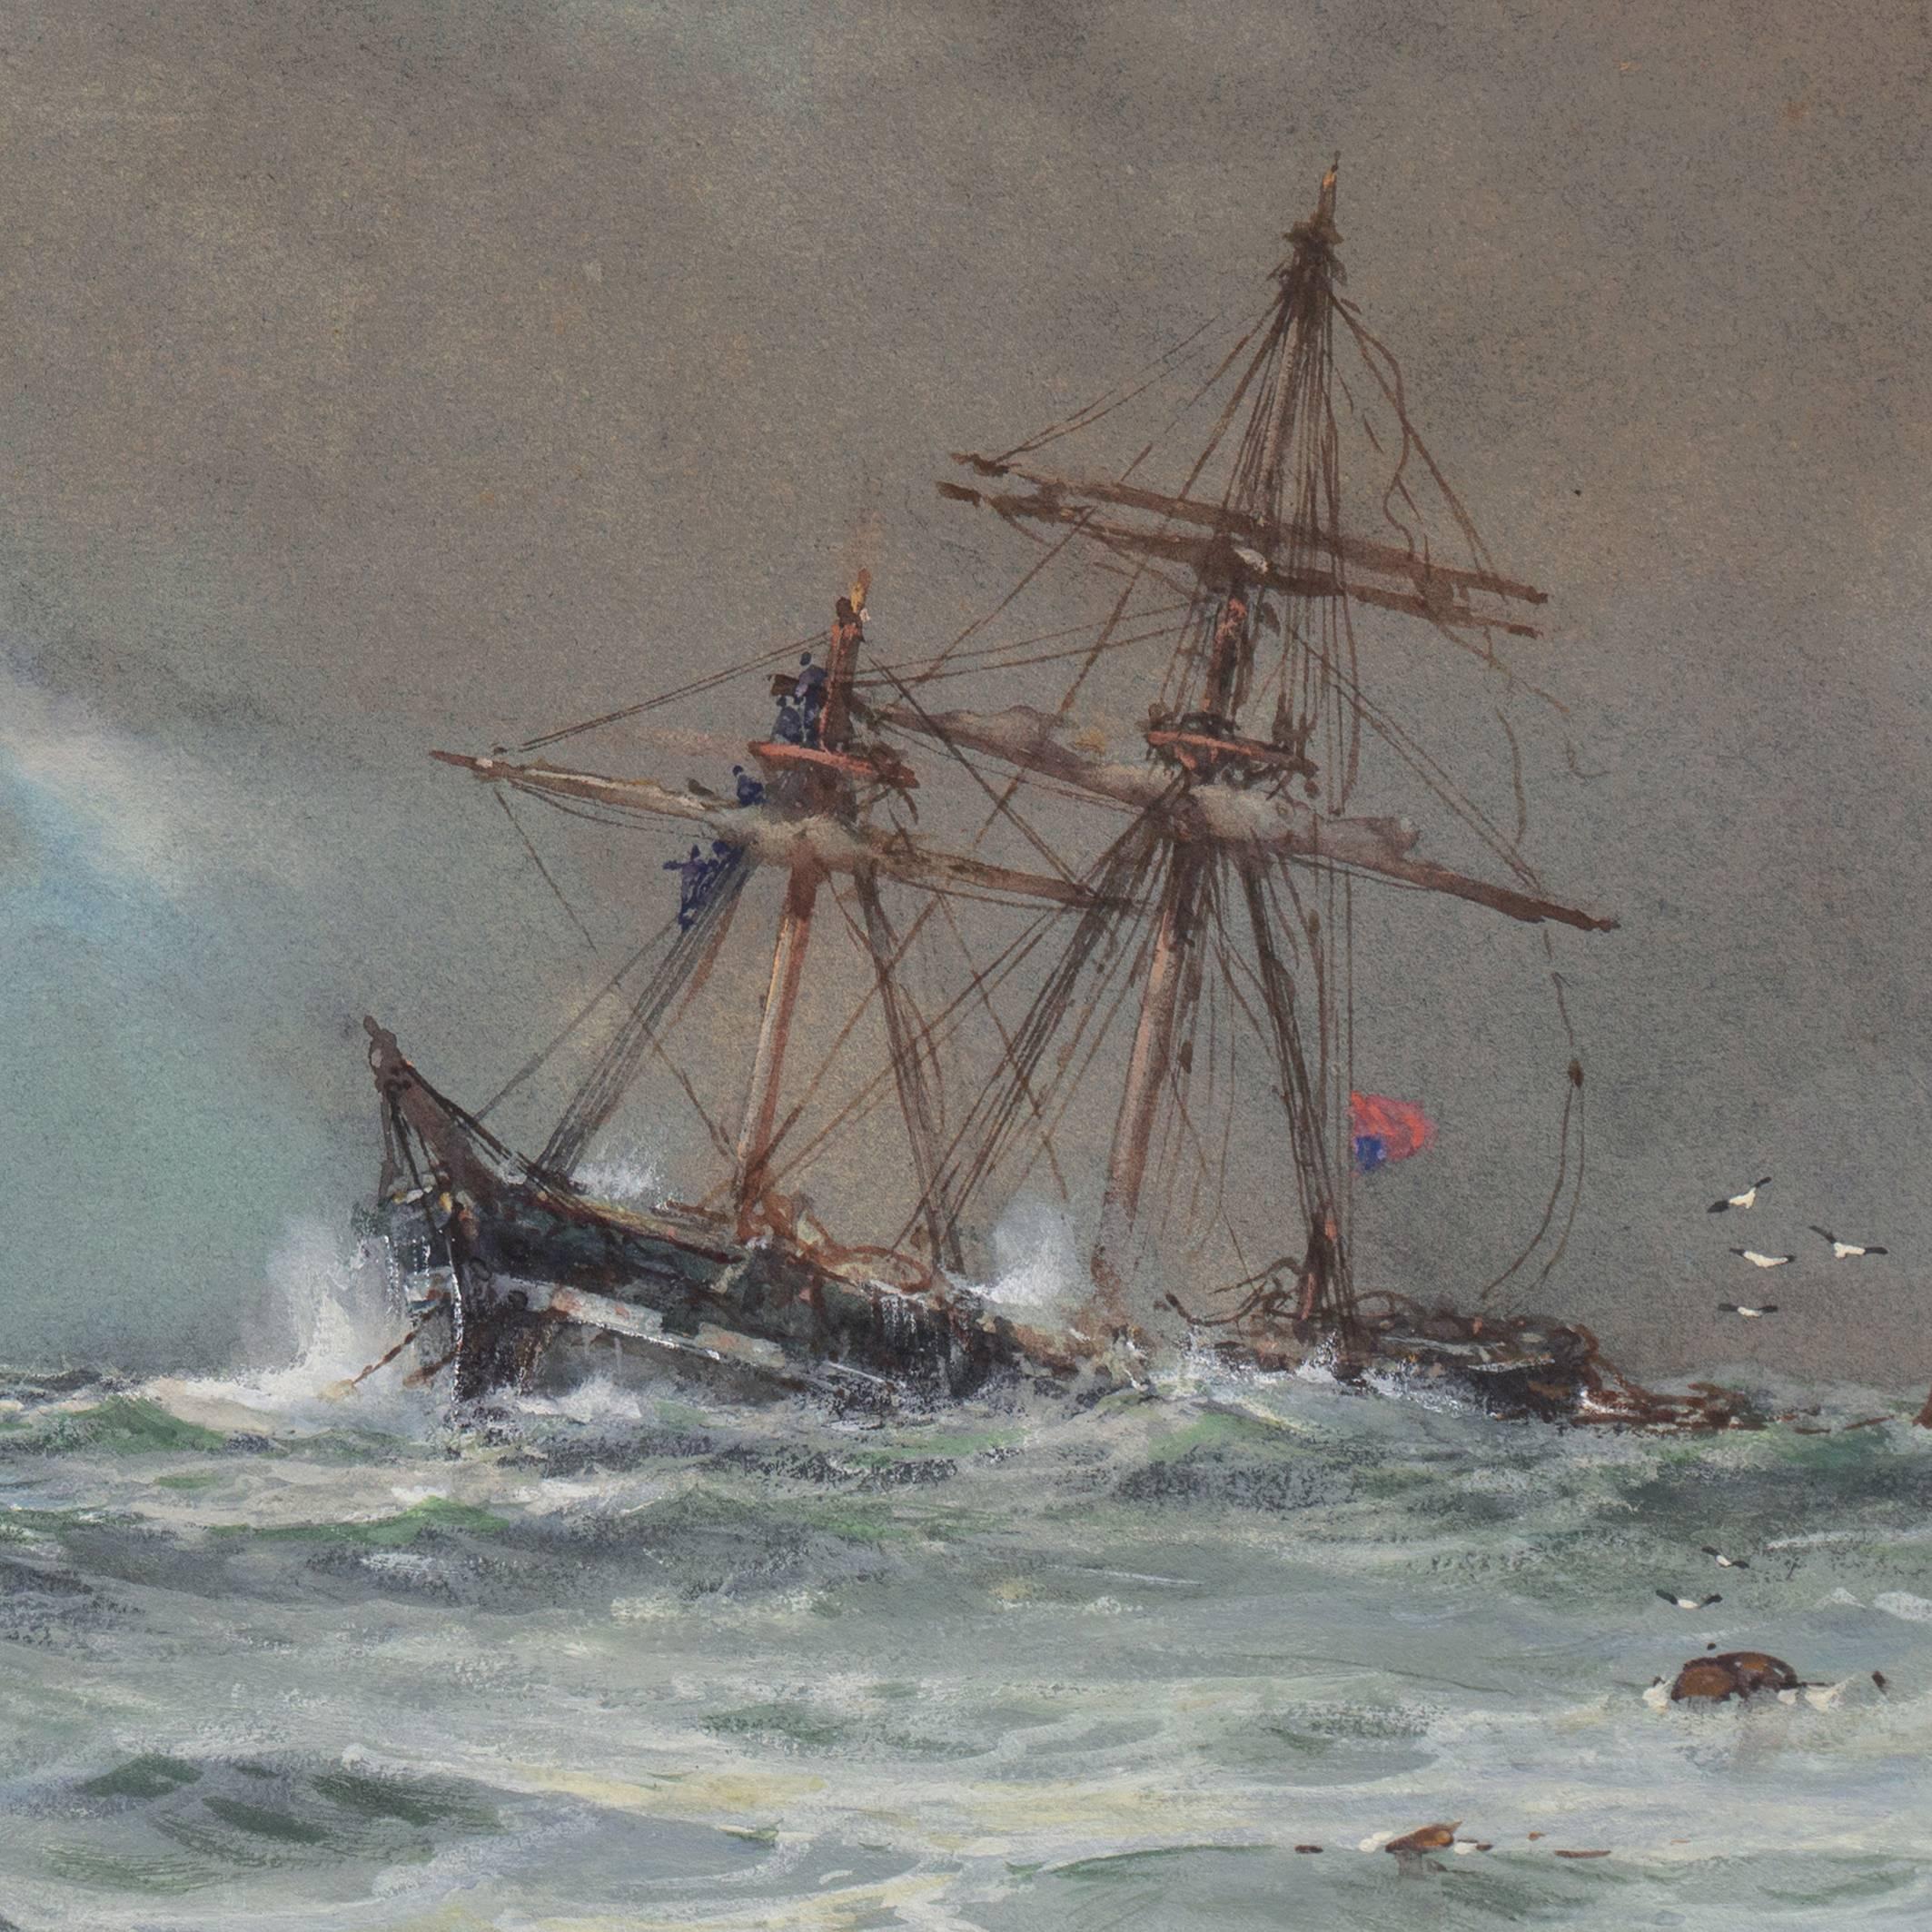 A dramatic gouache and watercolor marine scene showing a view of turbulent ocean waters overwhelming a three-masted ship. 

Signed lower left, 'A. Wilde Parsons' for Arthur Wilde Parsons (British, 1854 - 1931) and dated 1910.

A marine and landscape